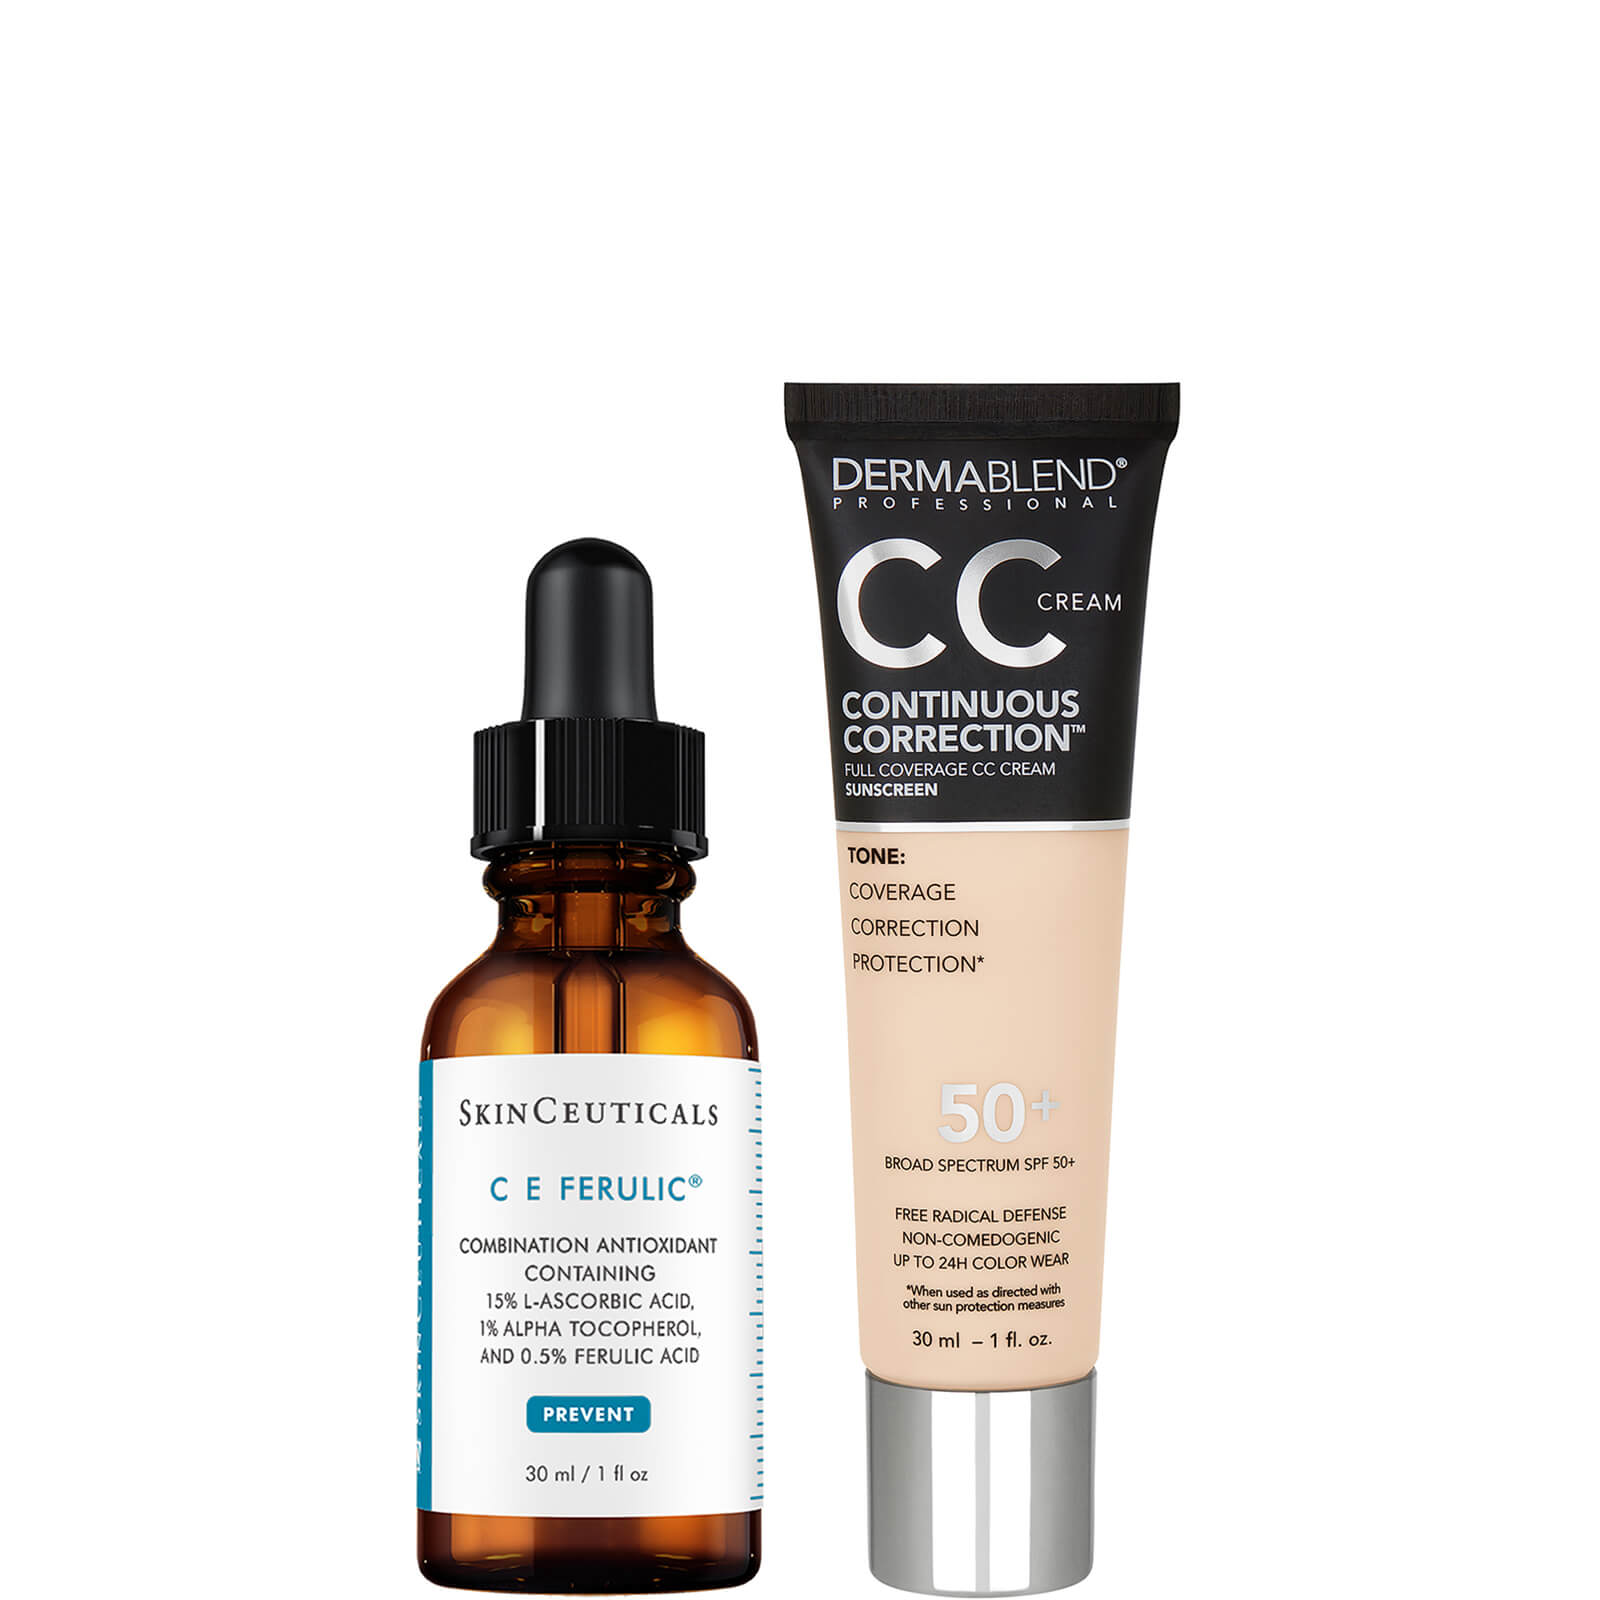 SkinCeuticals and Dermablend Anti-Aging Brightening Duo with Vitamin C and Niacinamide (Various Shades) ($223 Value) - 10N Fair 1